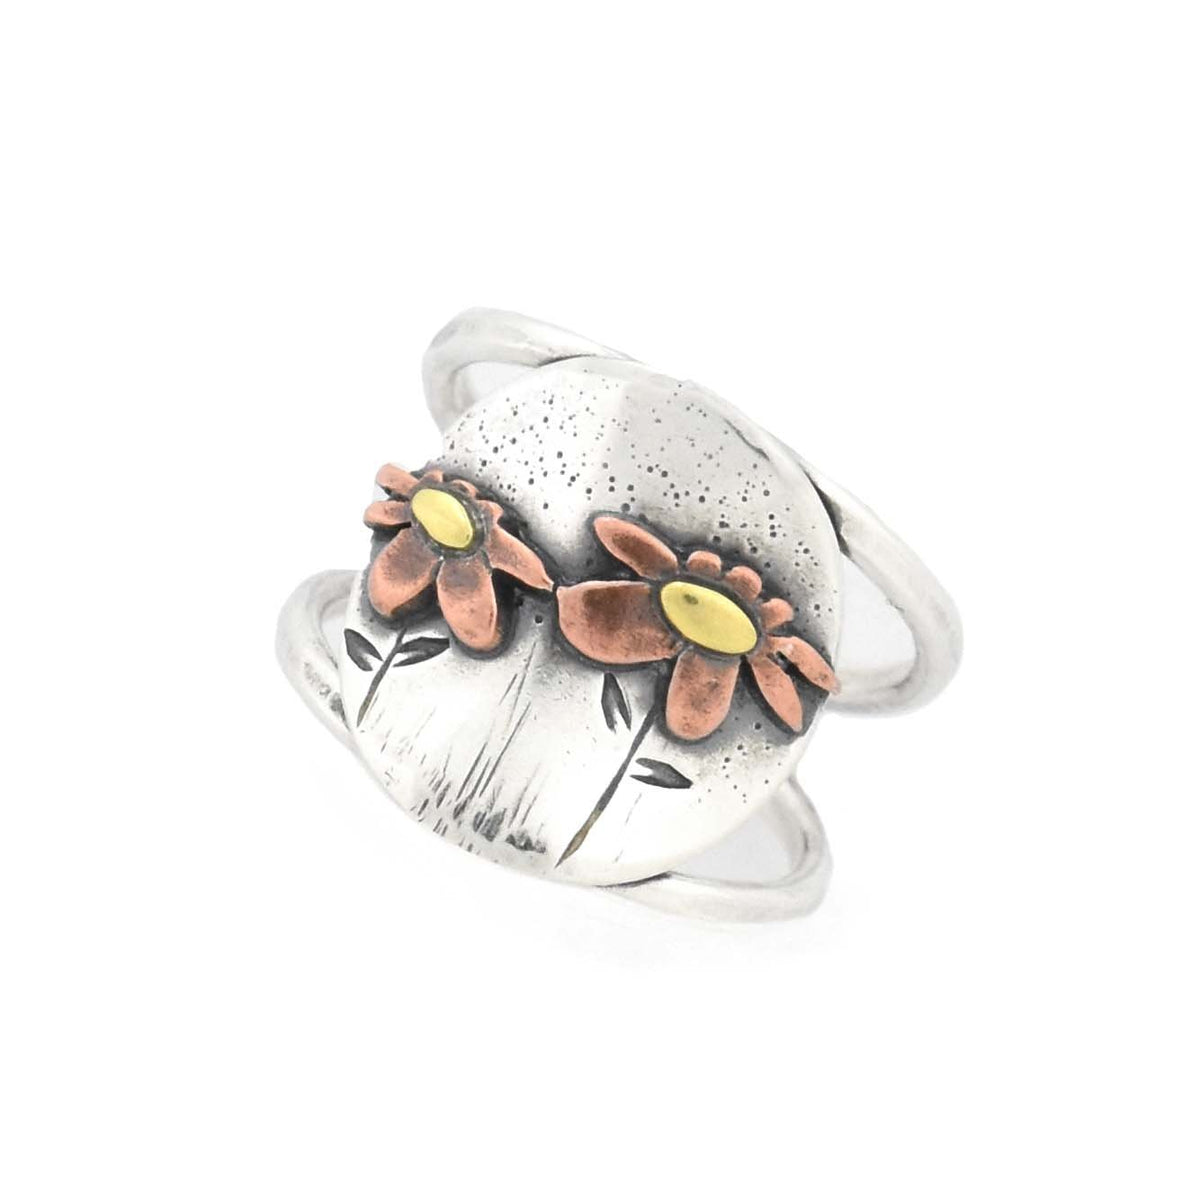 Wildflower Ring - Ring Select Size 4 4013 - handmade by Beth Millner Jewelry